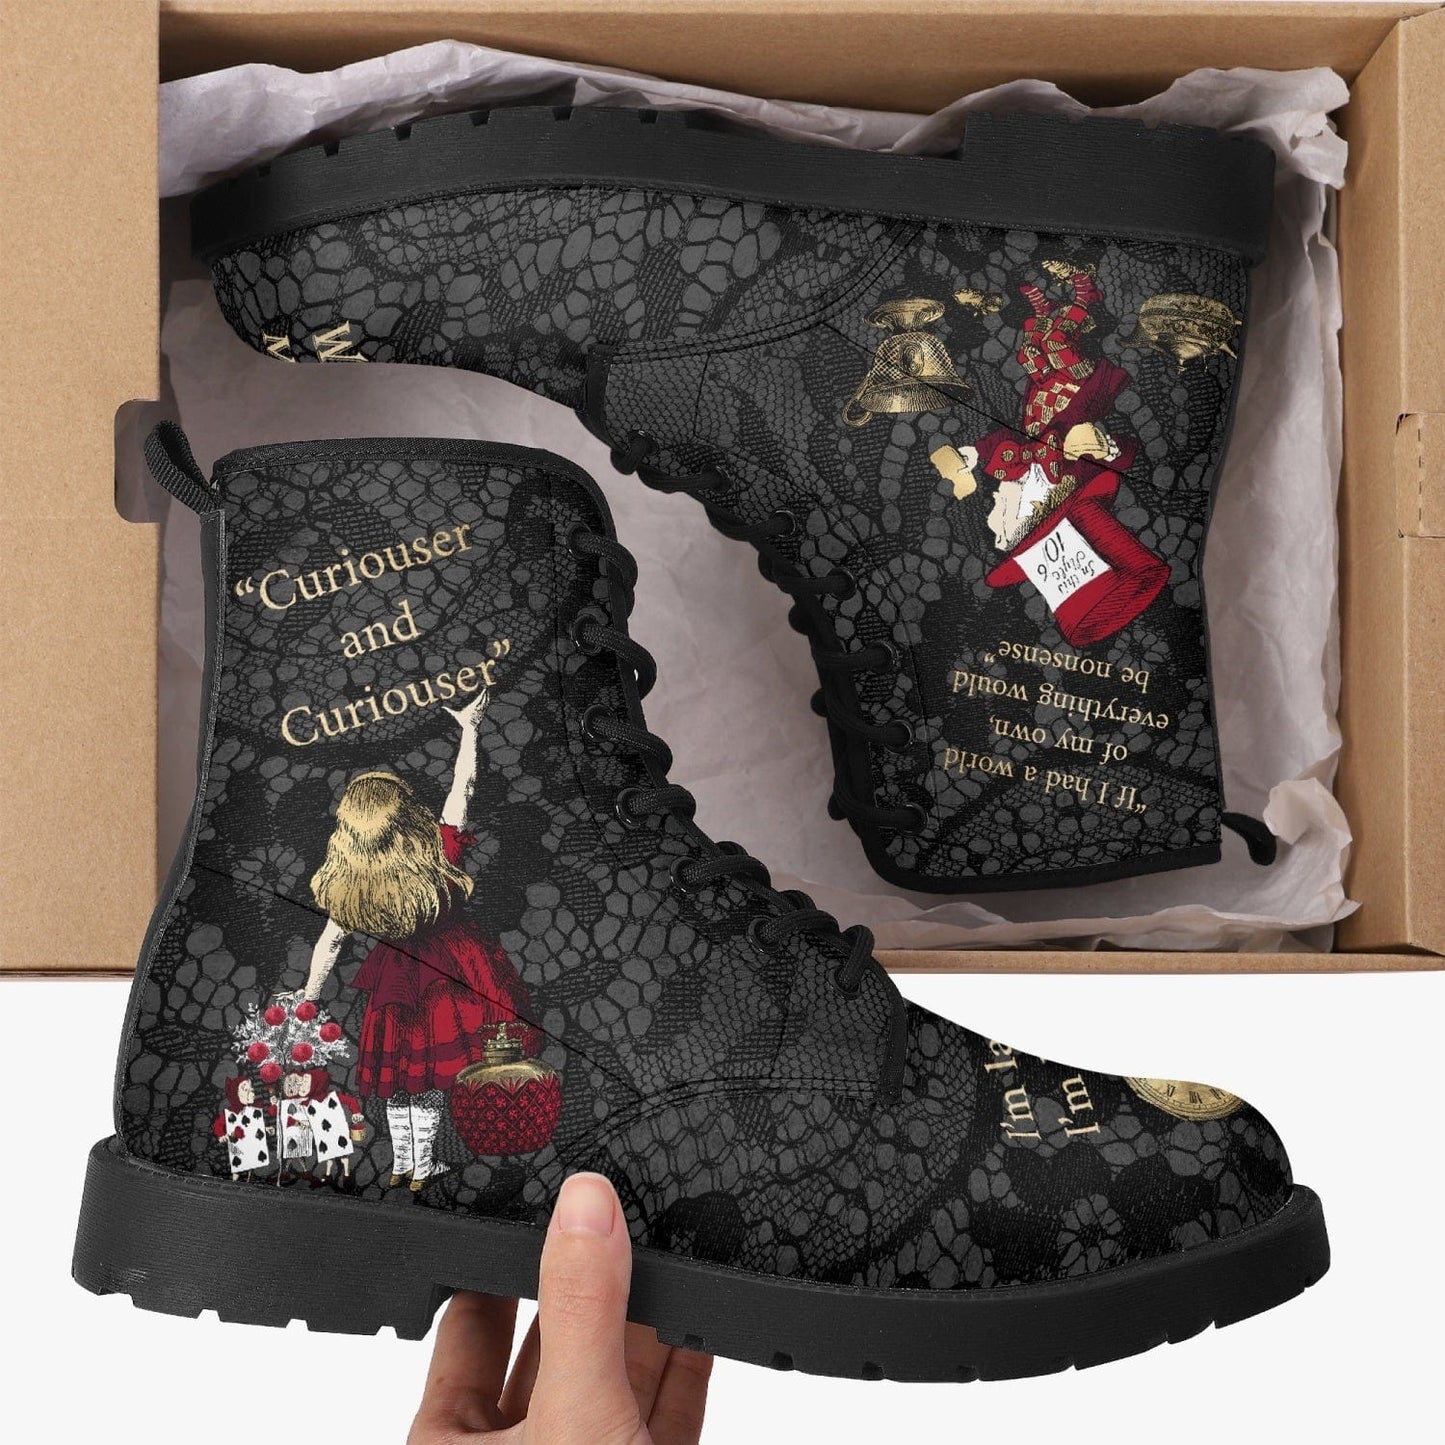 goth guy unboxing the gothic black gold and red vegan boots featuring Alice in Wonderland quotes